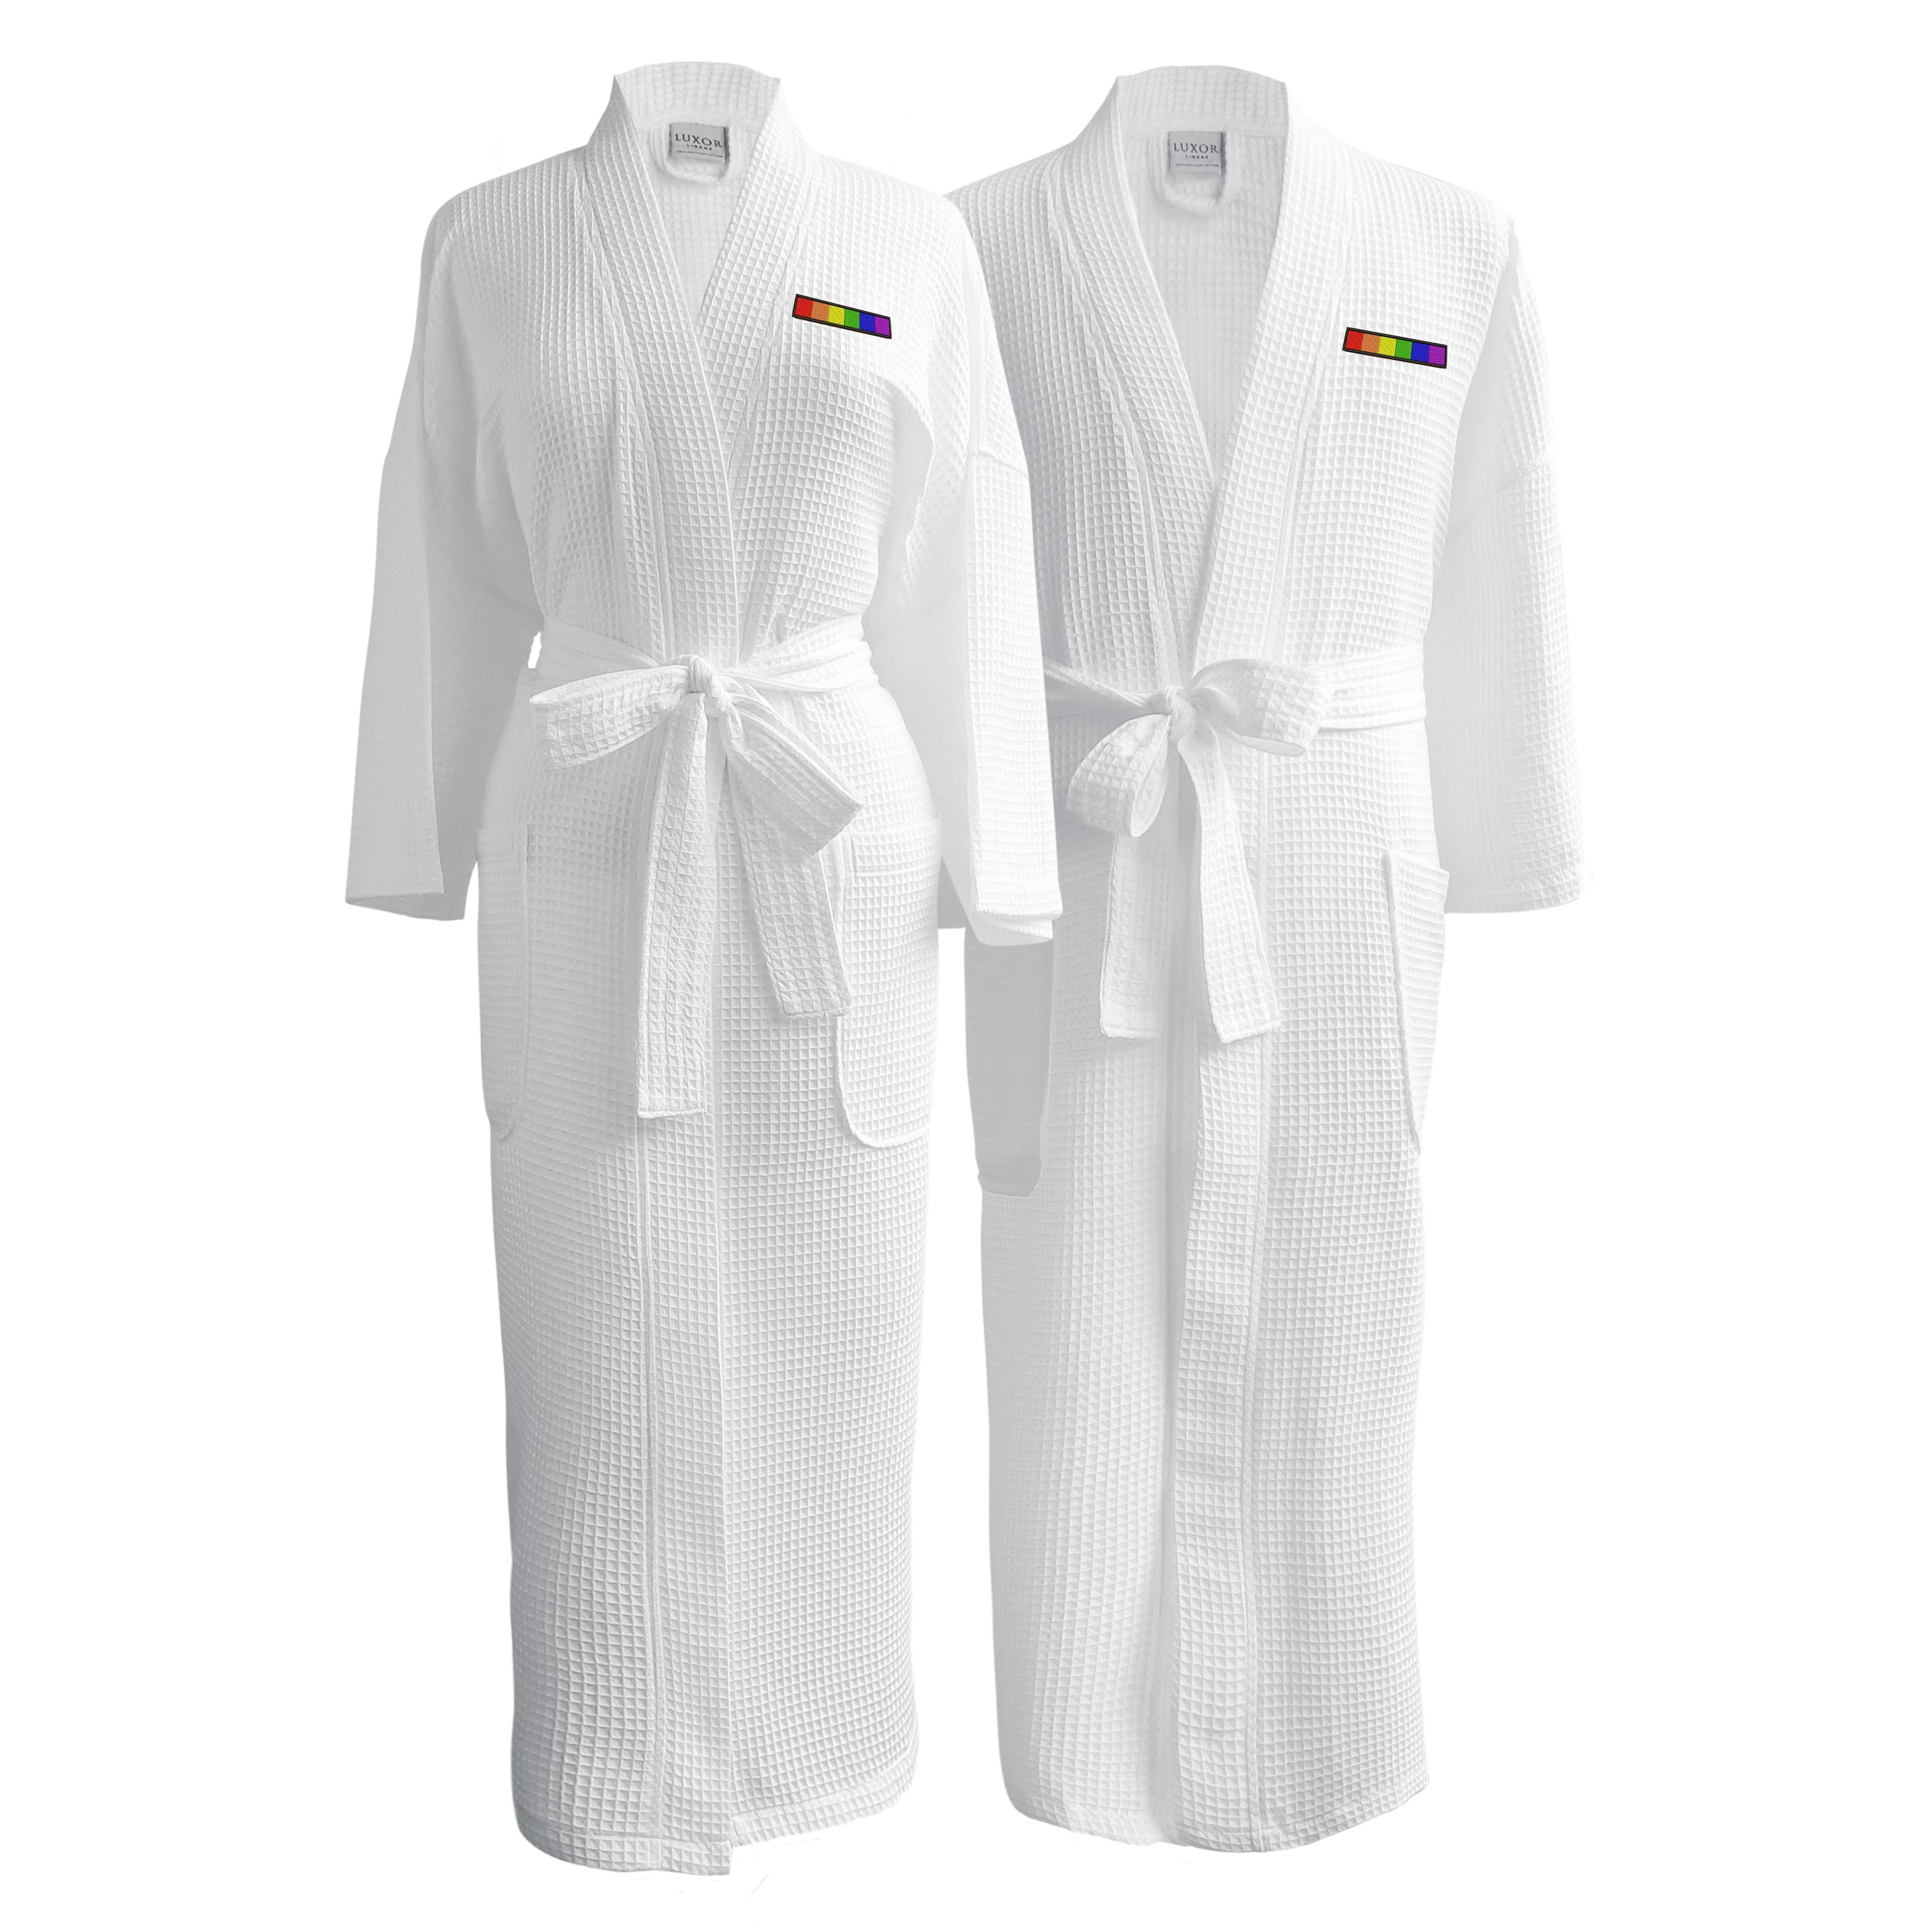 Bath Robe - Buy Bath Robes Online in India – Spaces India